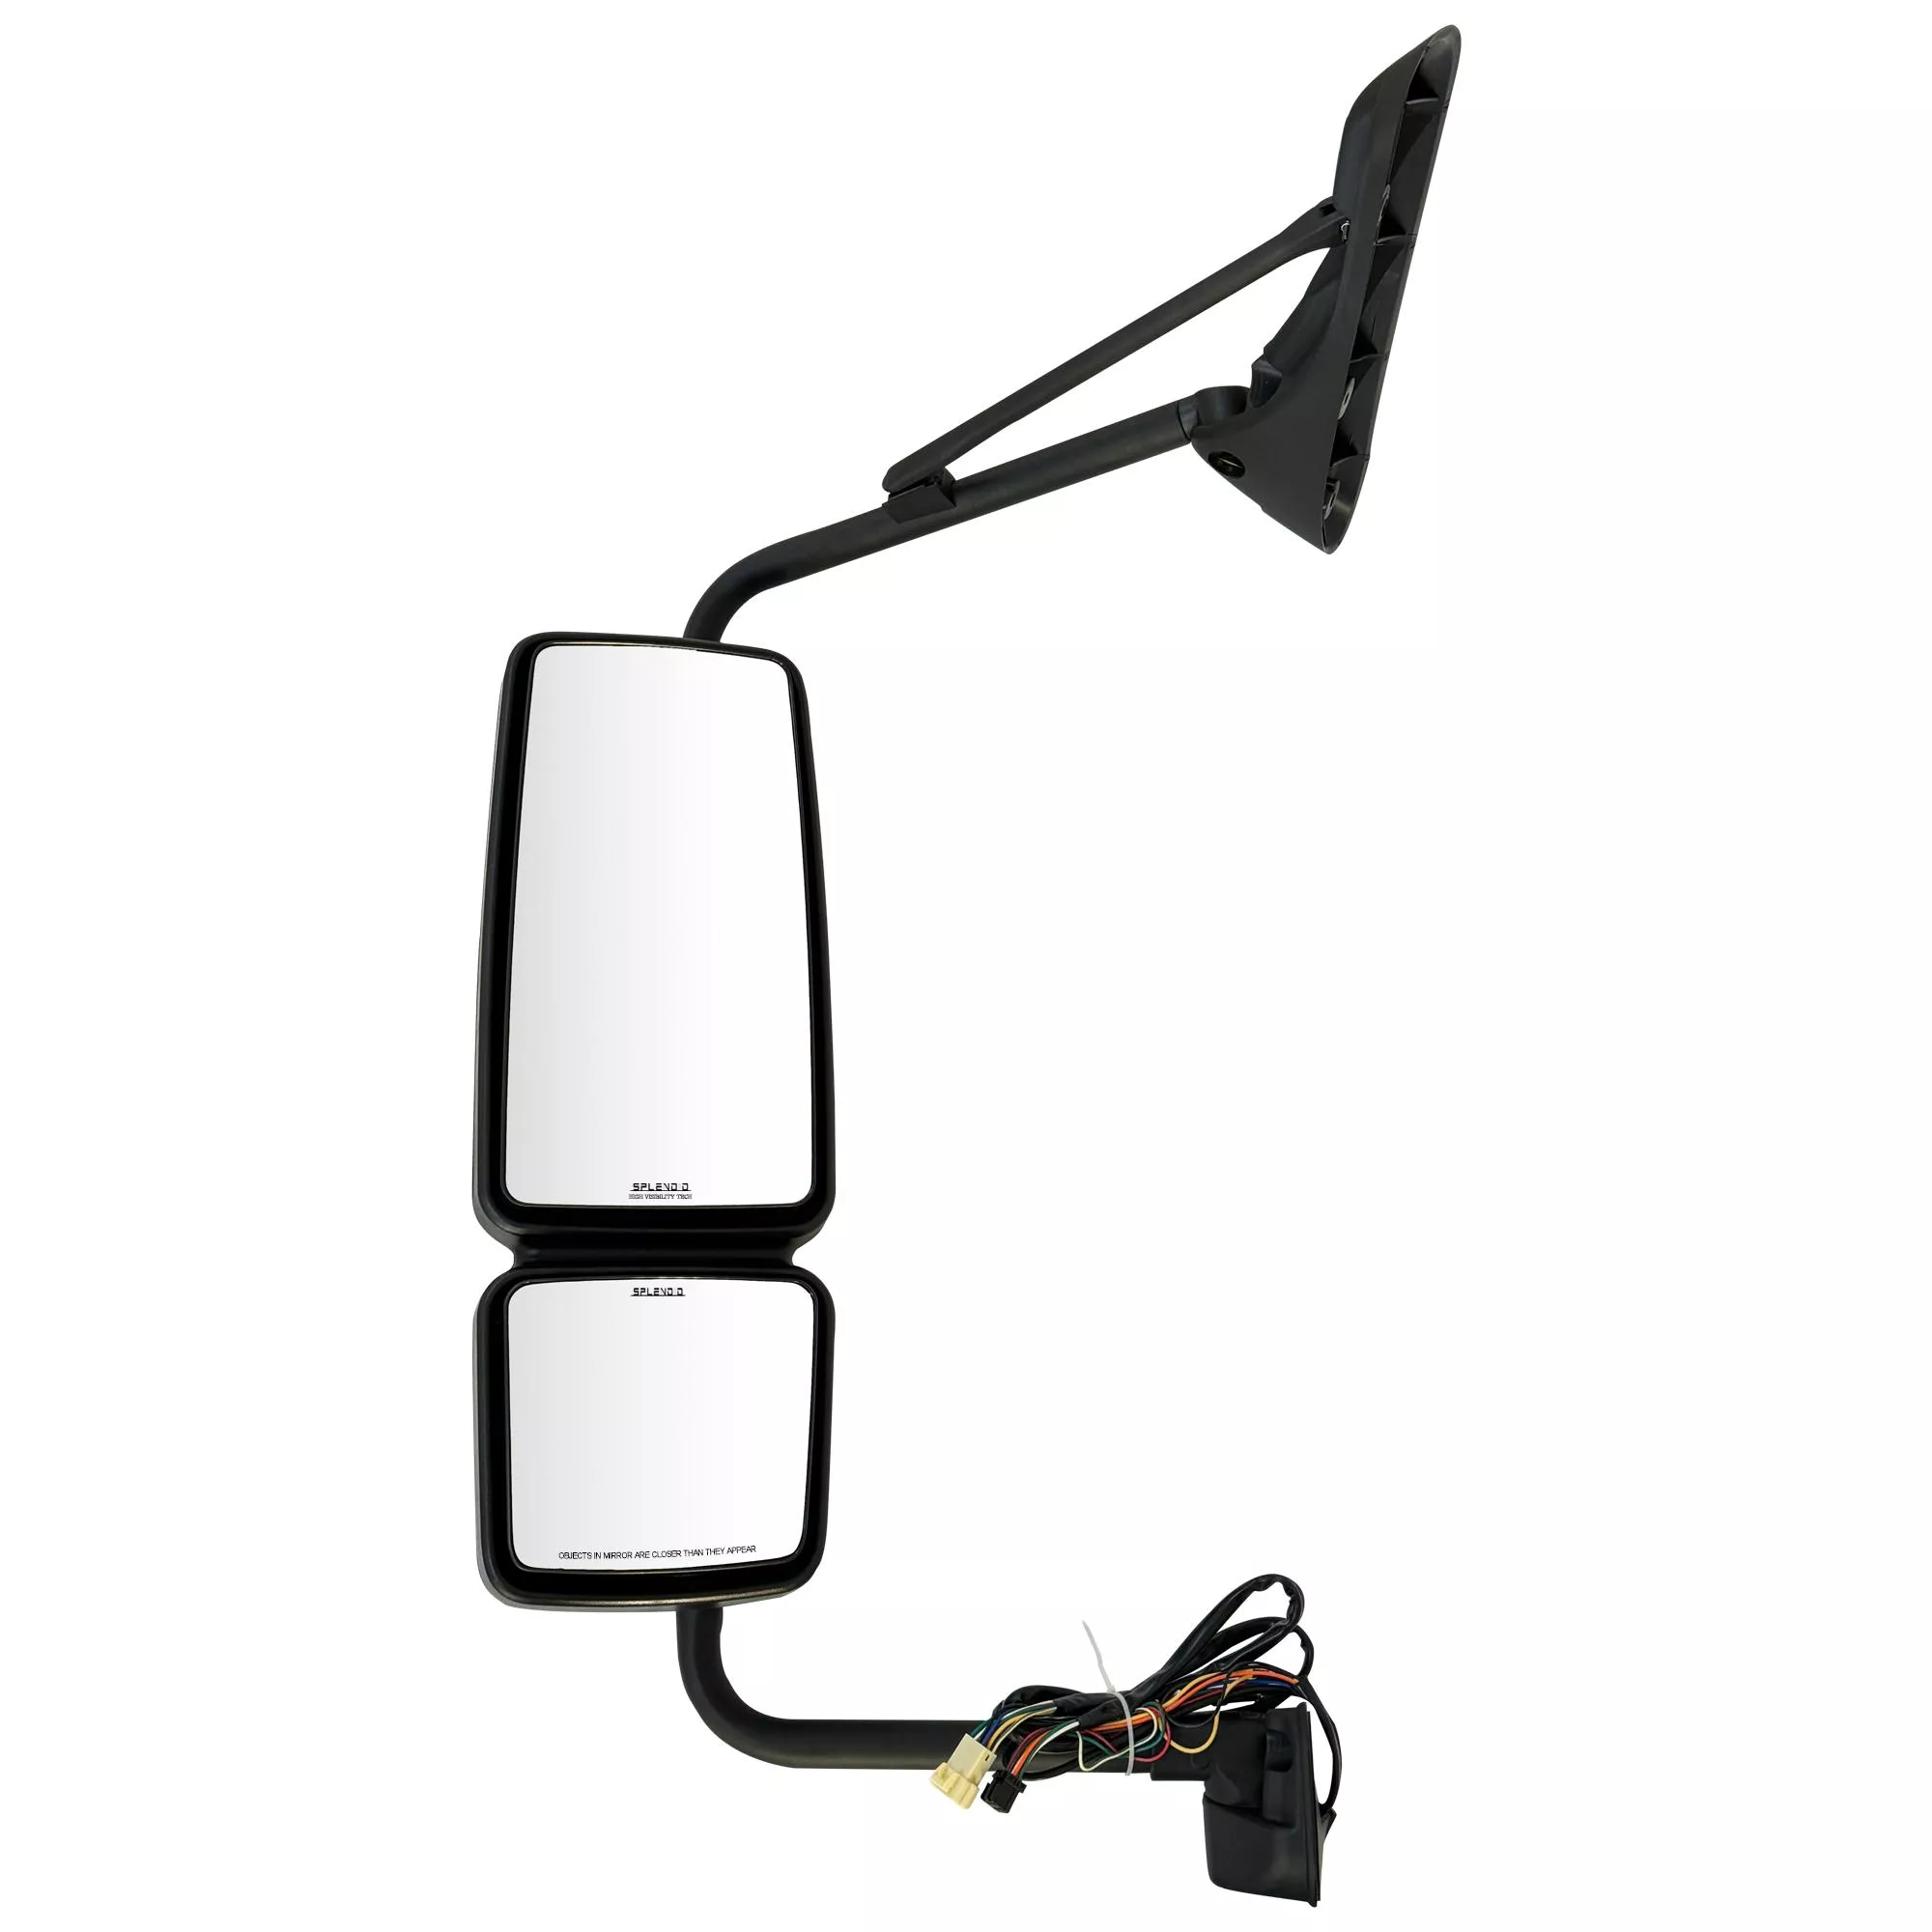 SPLENDID Replacement Side mirror, Power mirror, Heated with Turn Signals, for 2008-2012 International WorkStar 7700, 2008-2014 WorkStar 7600, 2017 WorkStar 7600 and 2013 Durastar, Driver Side